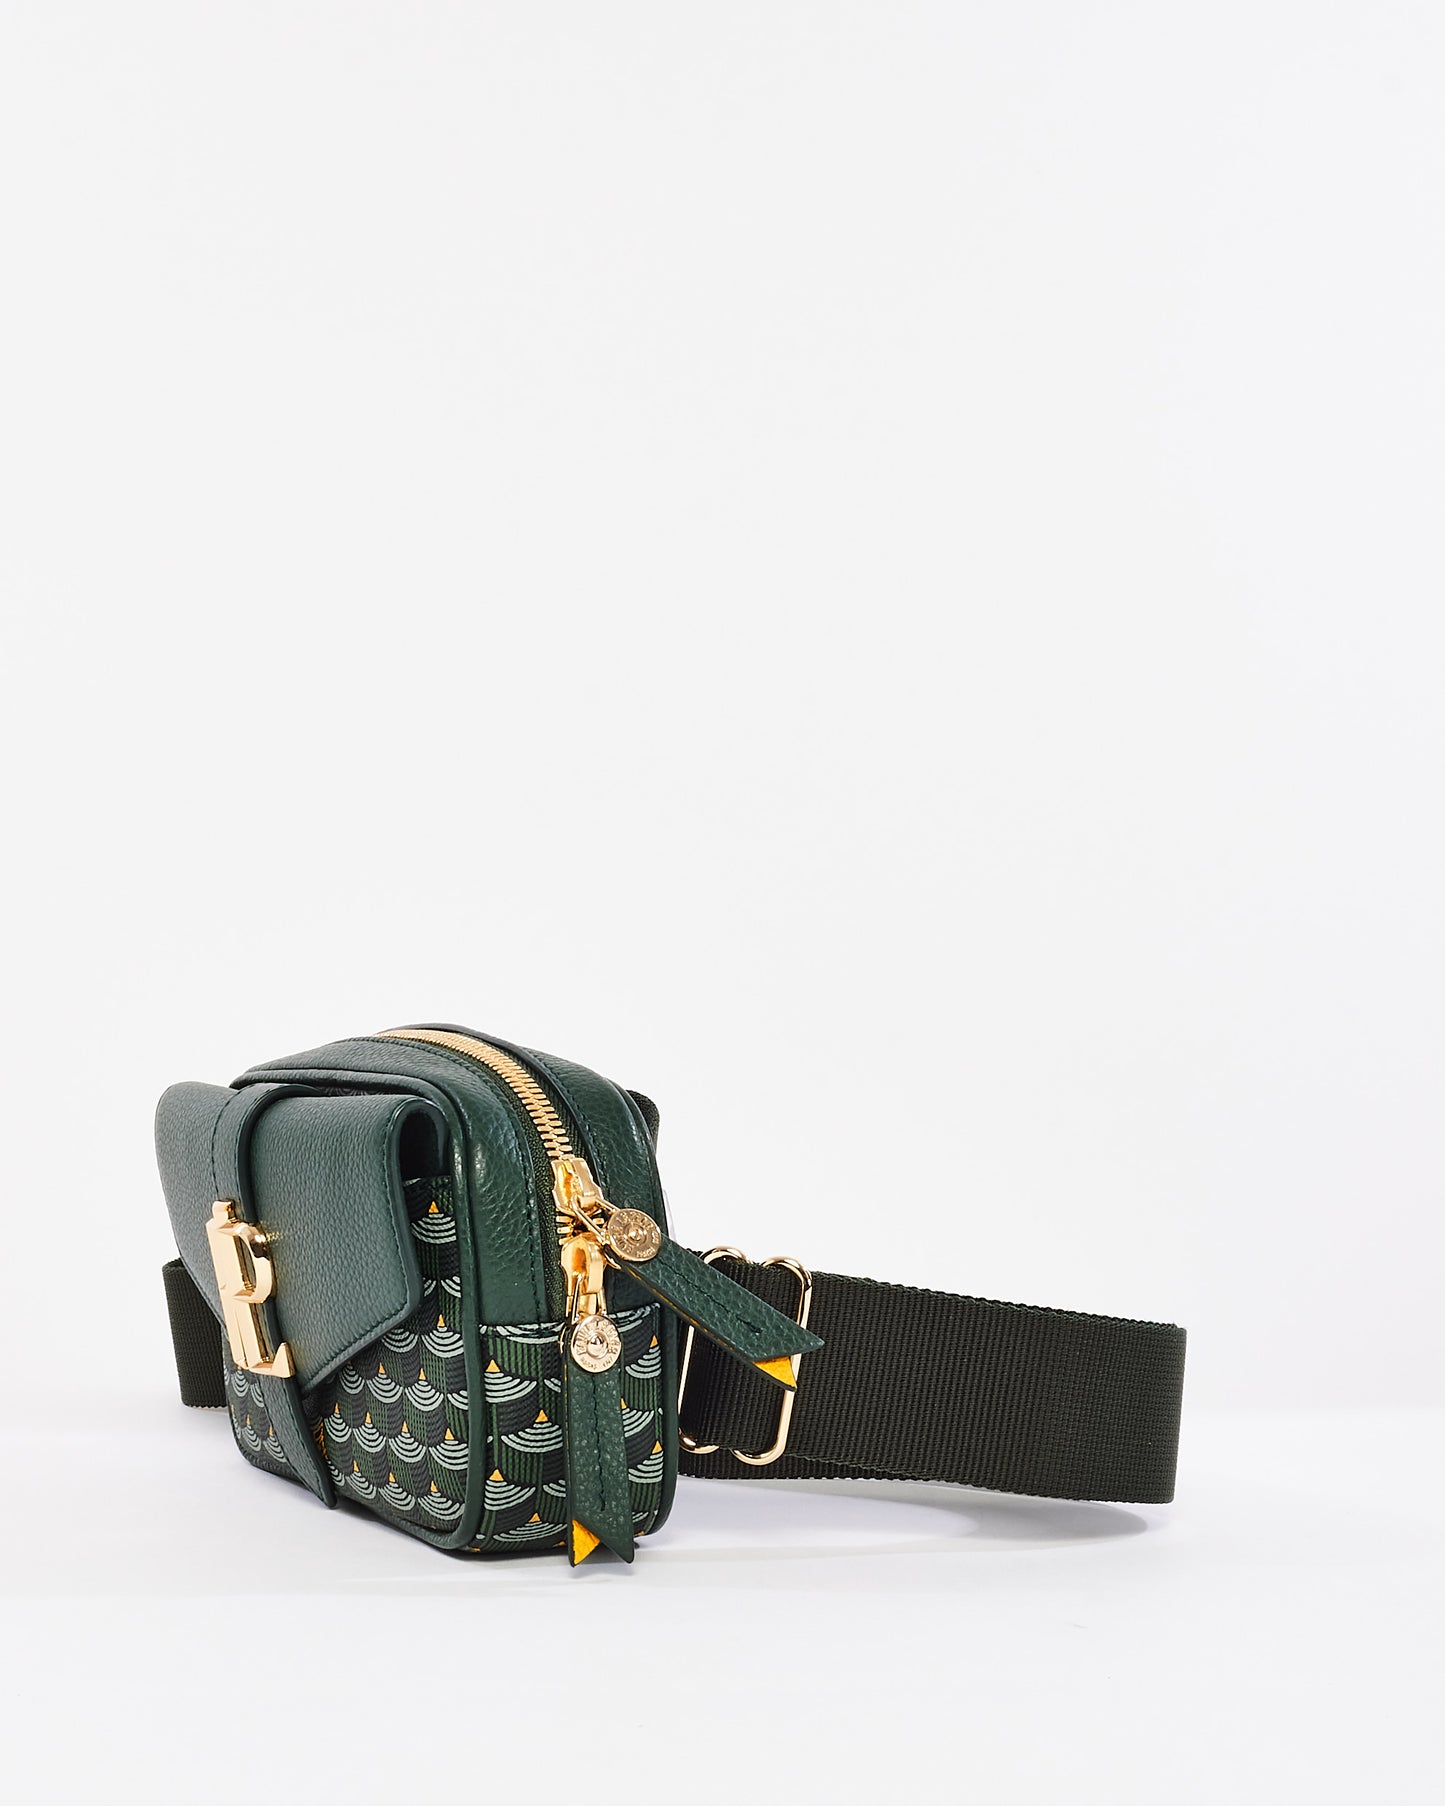 Fauré Le Page Green Coated Canvas Printed Belt Bag